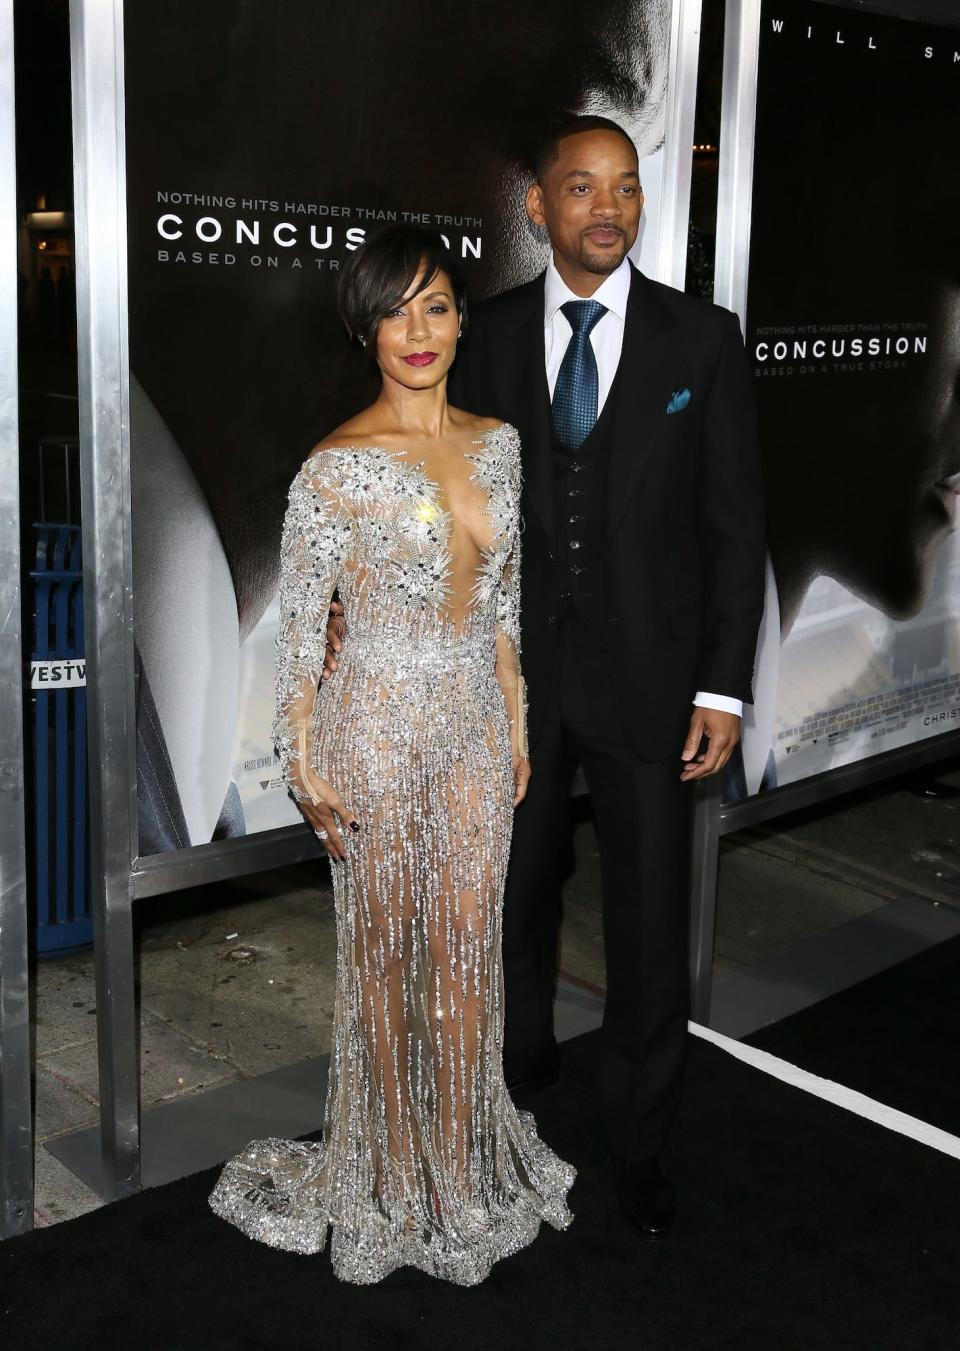 Jada Pinkett Smith and Will Smith at a "Concussion" screening on November 22, 2015.